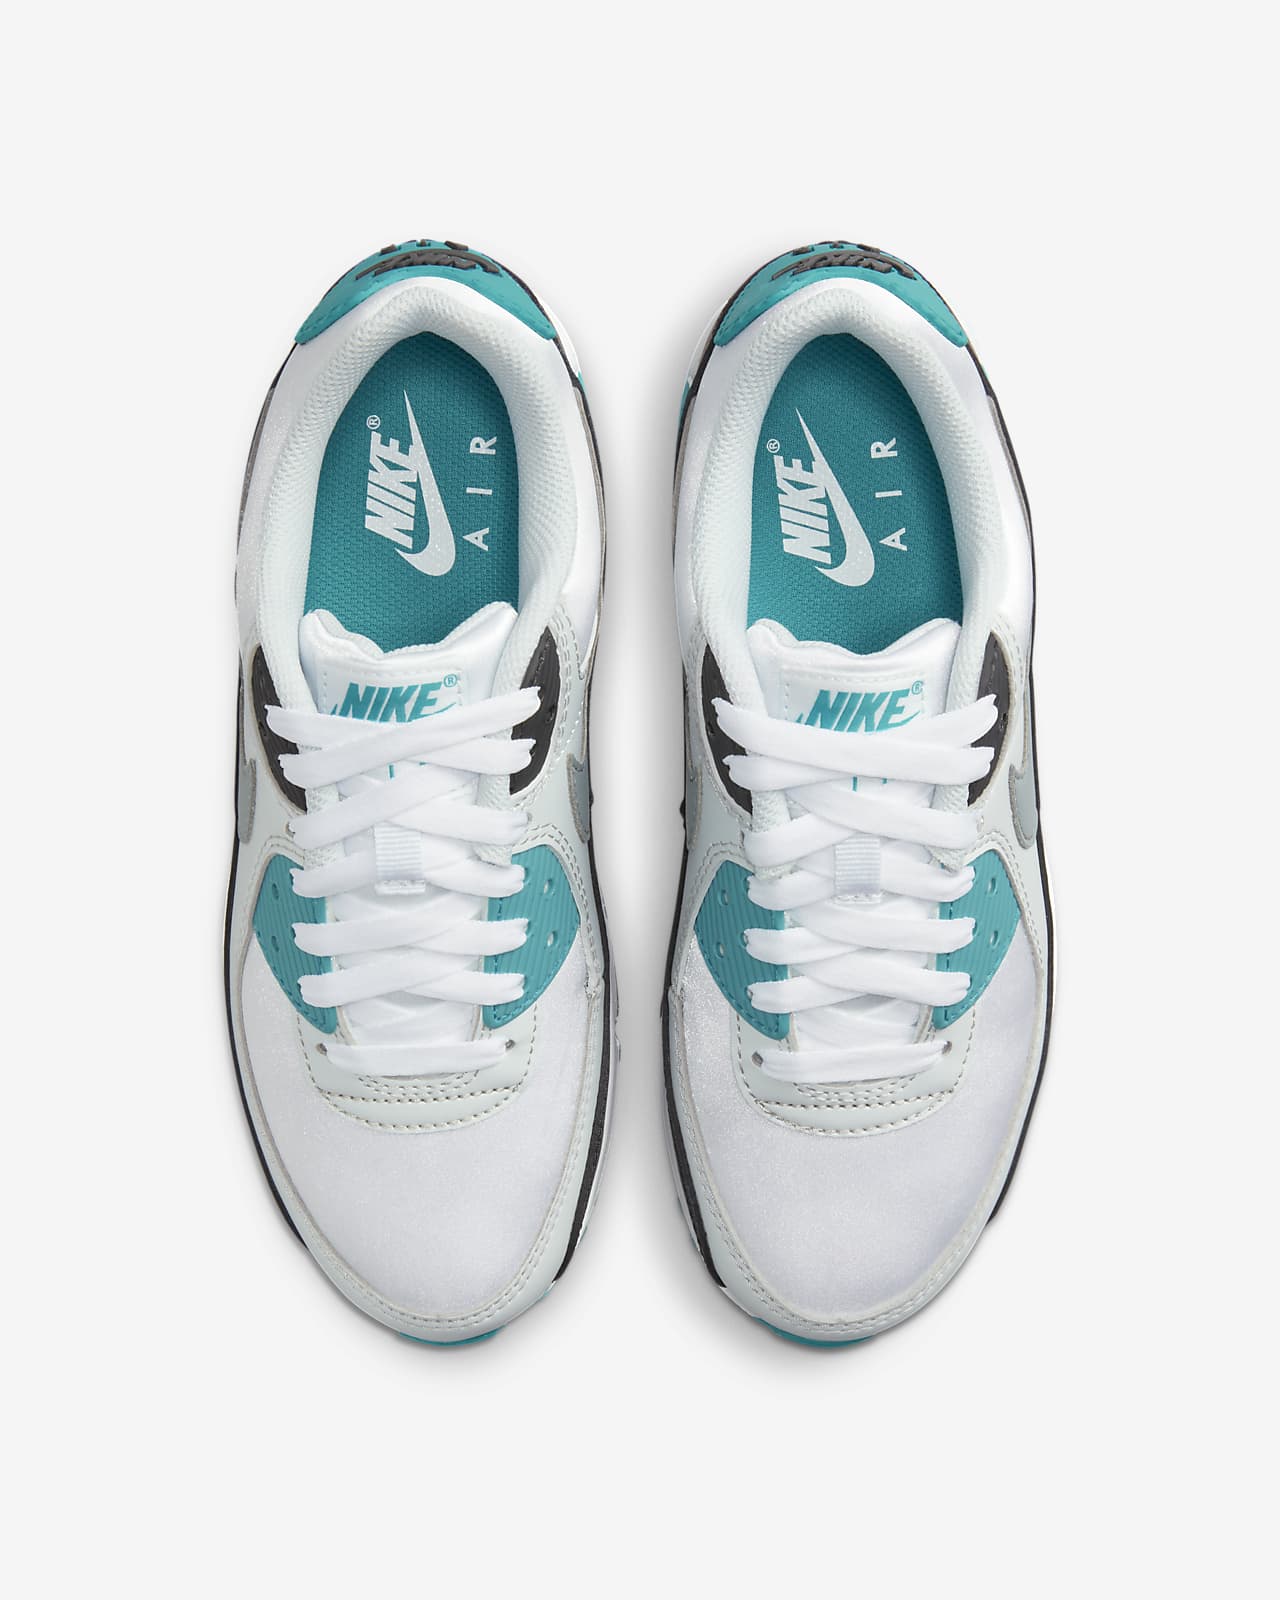 Nike Women's Air Max 90s Trainers